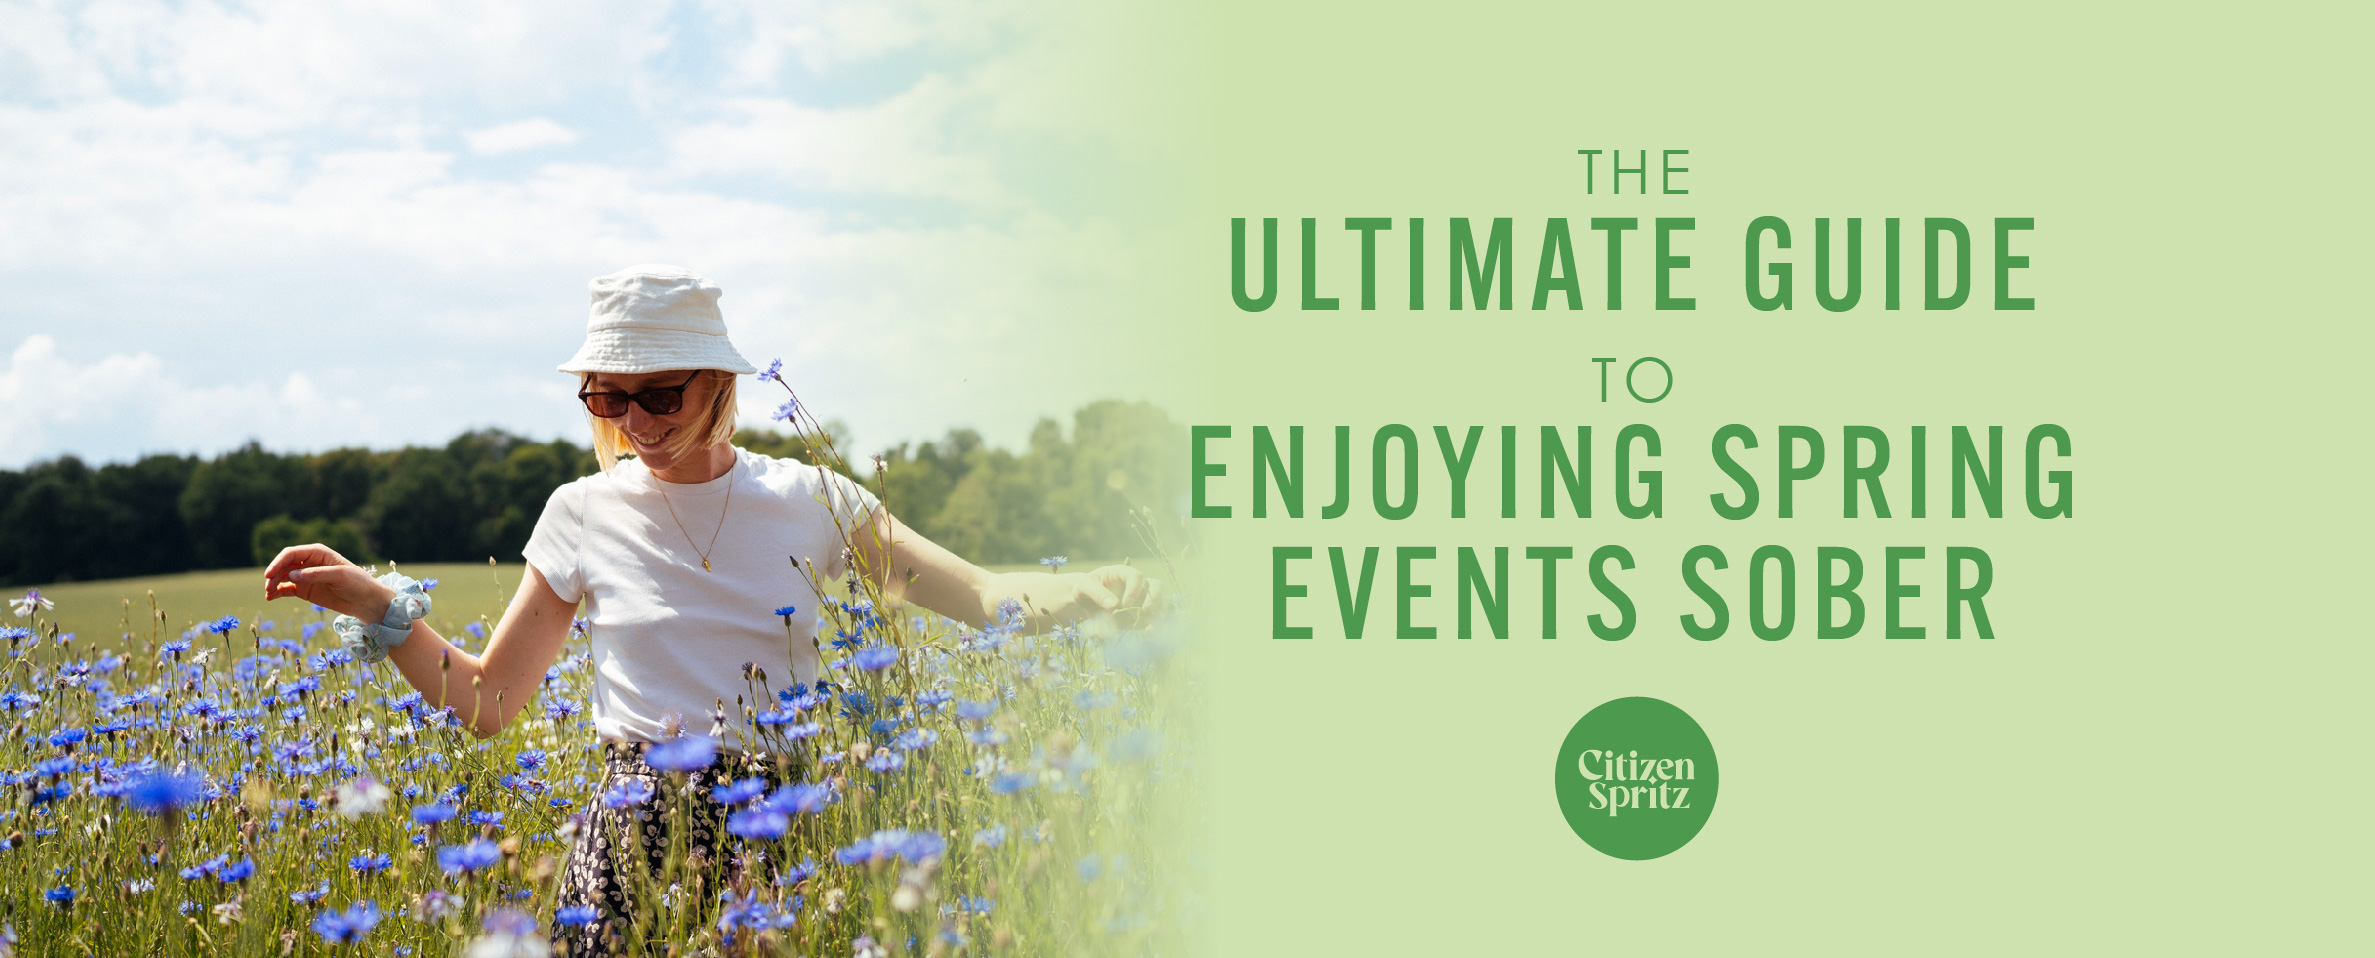 "A woman in a white hat and t-shirt joyfully wandering through a field of blue flowers under a sunny sky, next to the title 'THE ULTIMATE GUIDE TO ENJOYING SPRING EVENTS SOBER' presented by Citizen Spritz, capturing the essence of celebrating the vibrancy of spring with refreshing, non-alcoholic beverages.